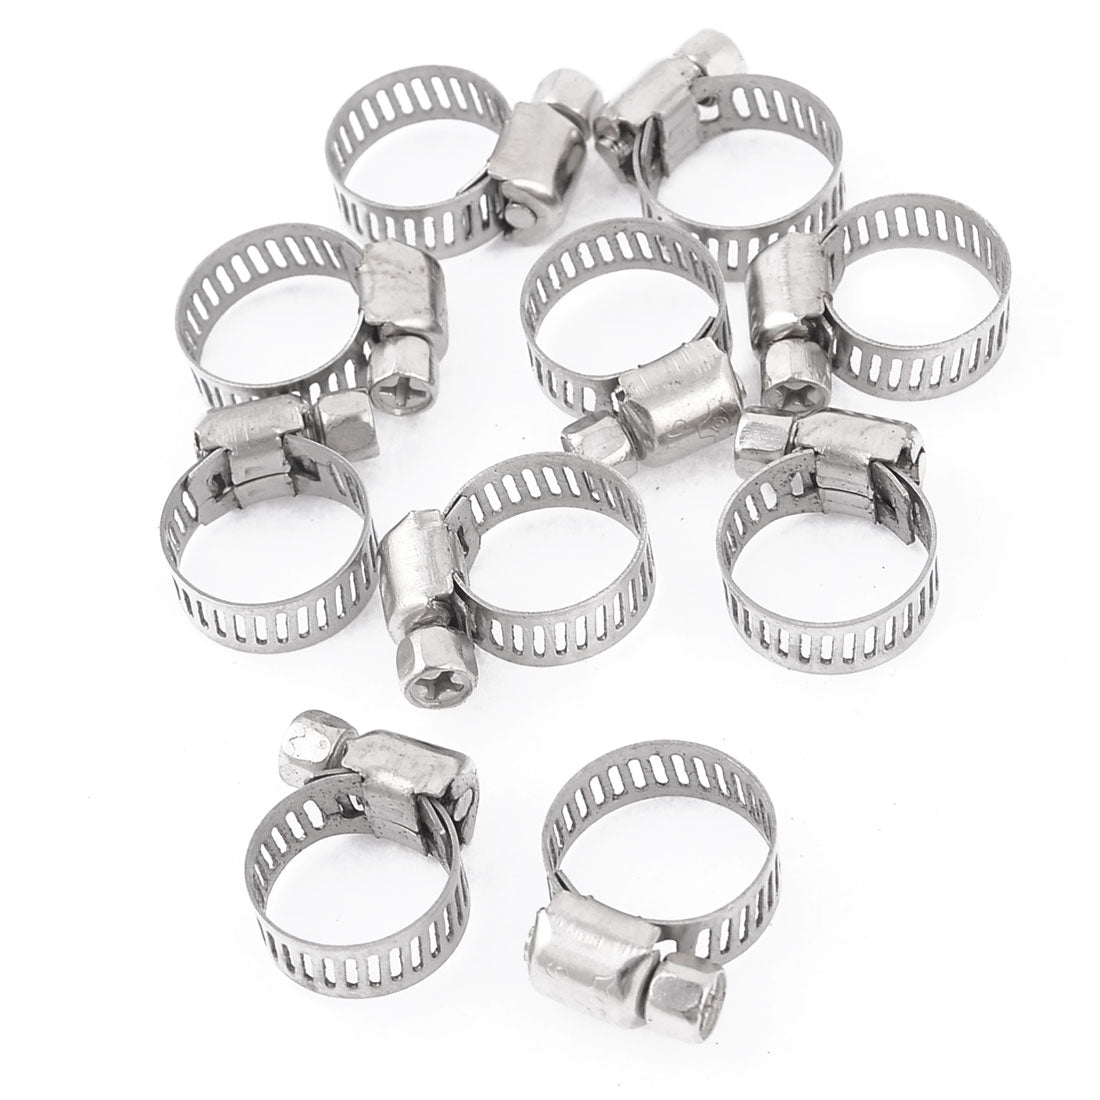 uxcell Uxcell 10 Pcs Stainless Steel 9mm to 16mm Hose Pipe Clamps Clips Fastener